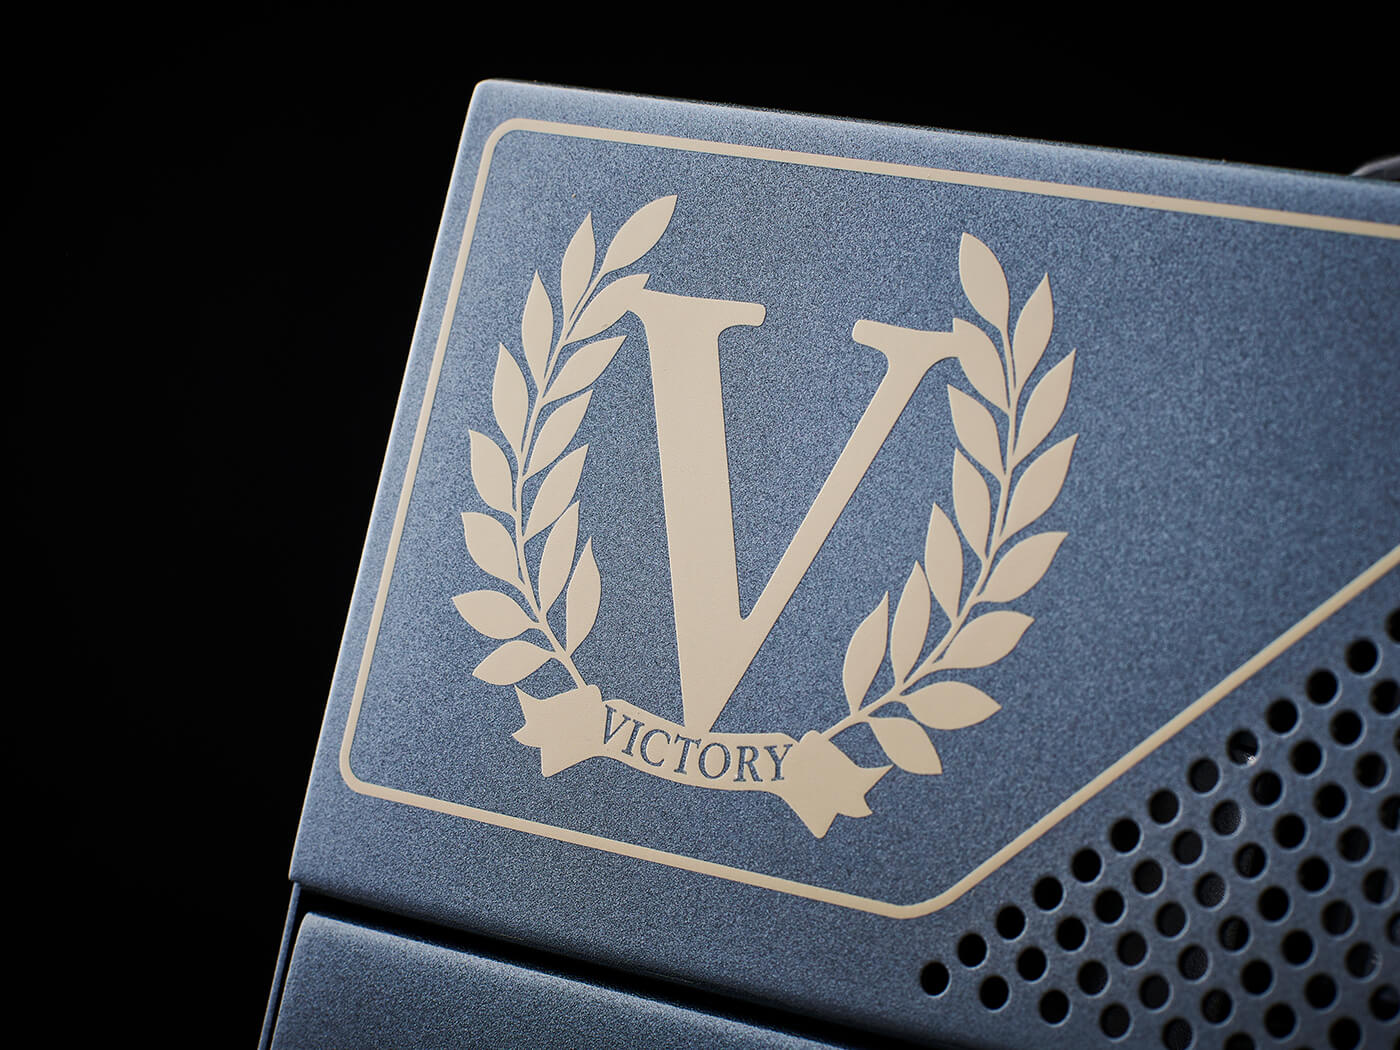 Victory logo on the MKII